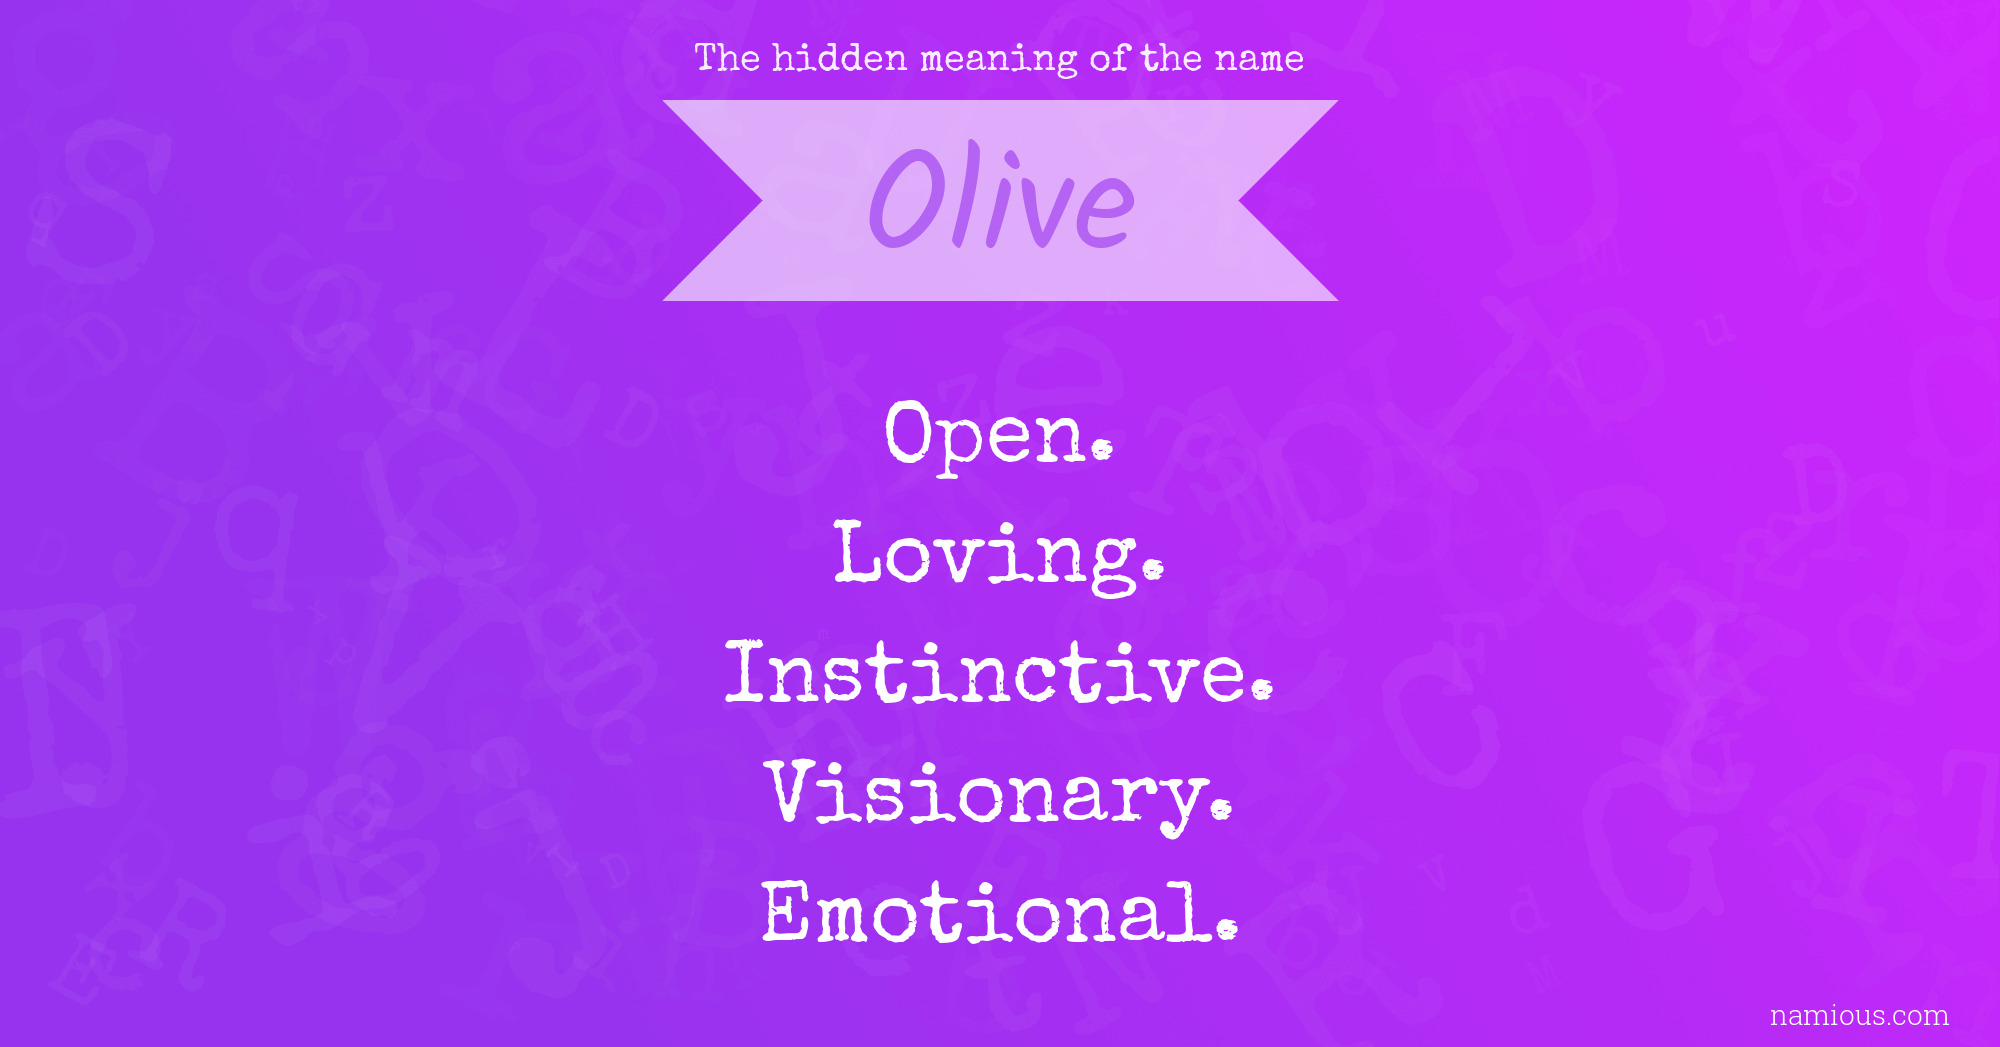 The hidden meaning of the name Olive | Namious